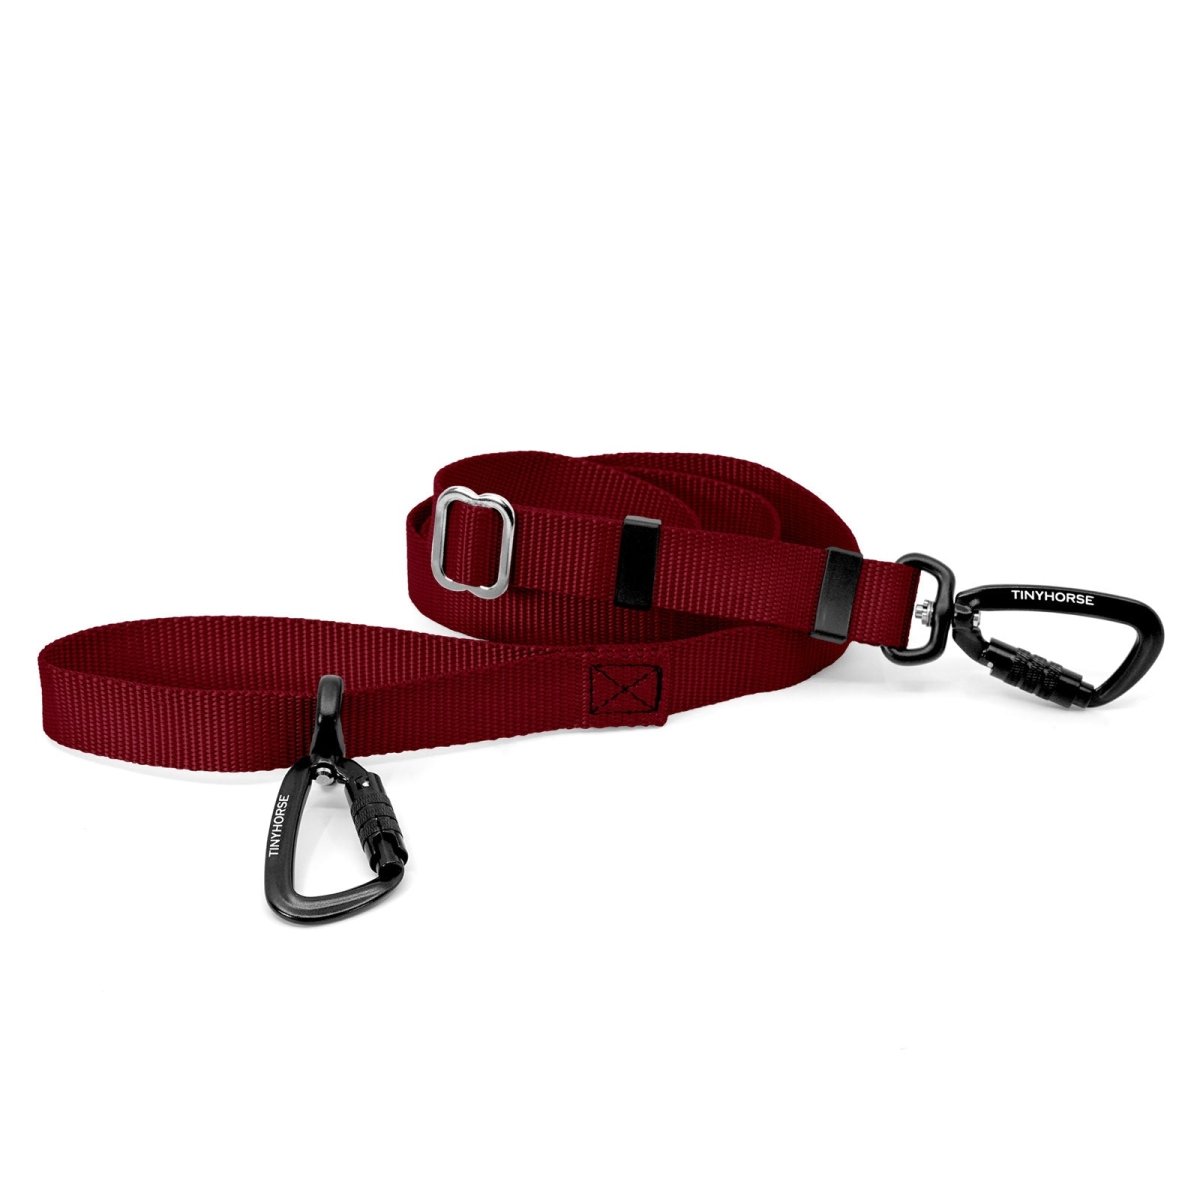 A red-coloured Lead-All Lite Extra with 2 auto-locking carabiners and nylon webbing